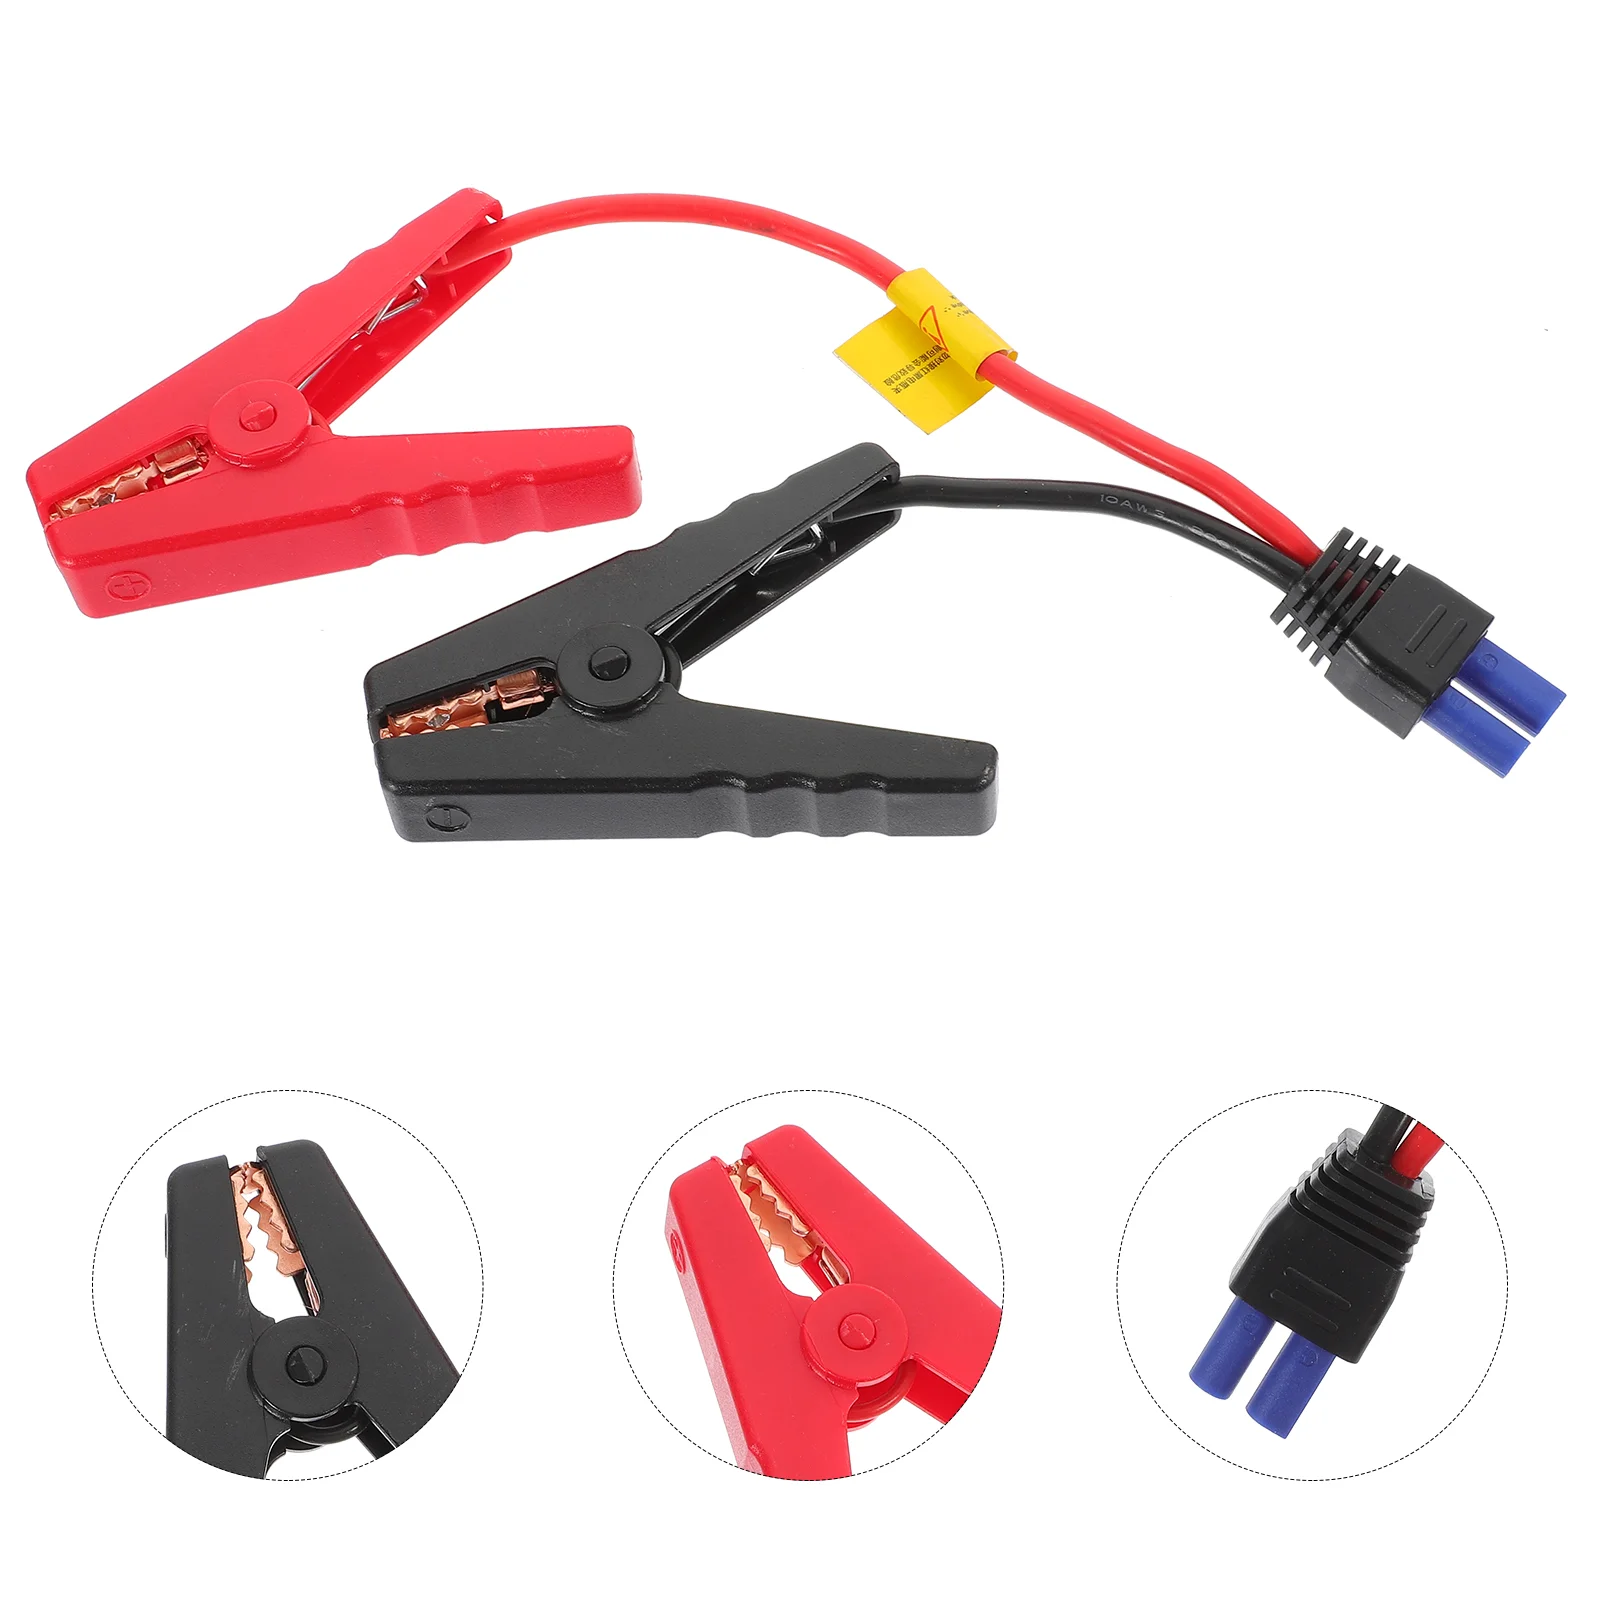 

EC5 Connector Auto Car Emergency Jumper Cable Wires Alligator Clamp Booster Battery Clips For Universal Car Jump Starter